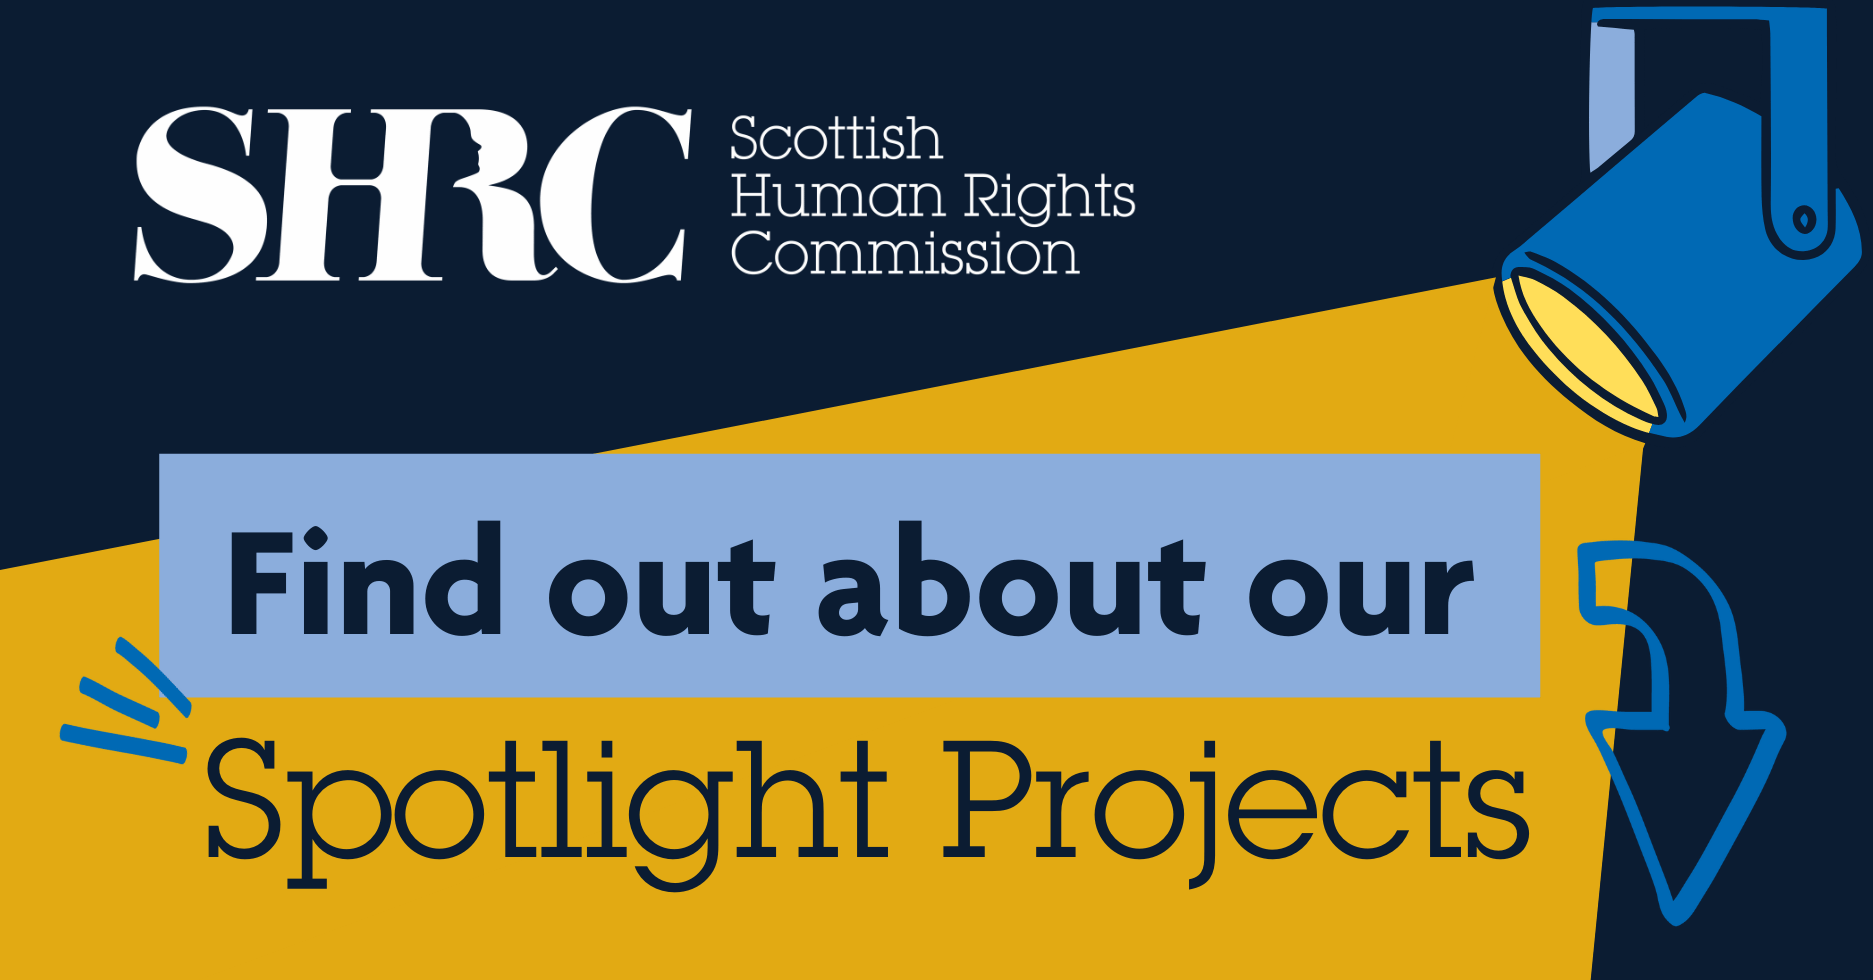 Find out about our spotlight projects